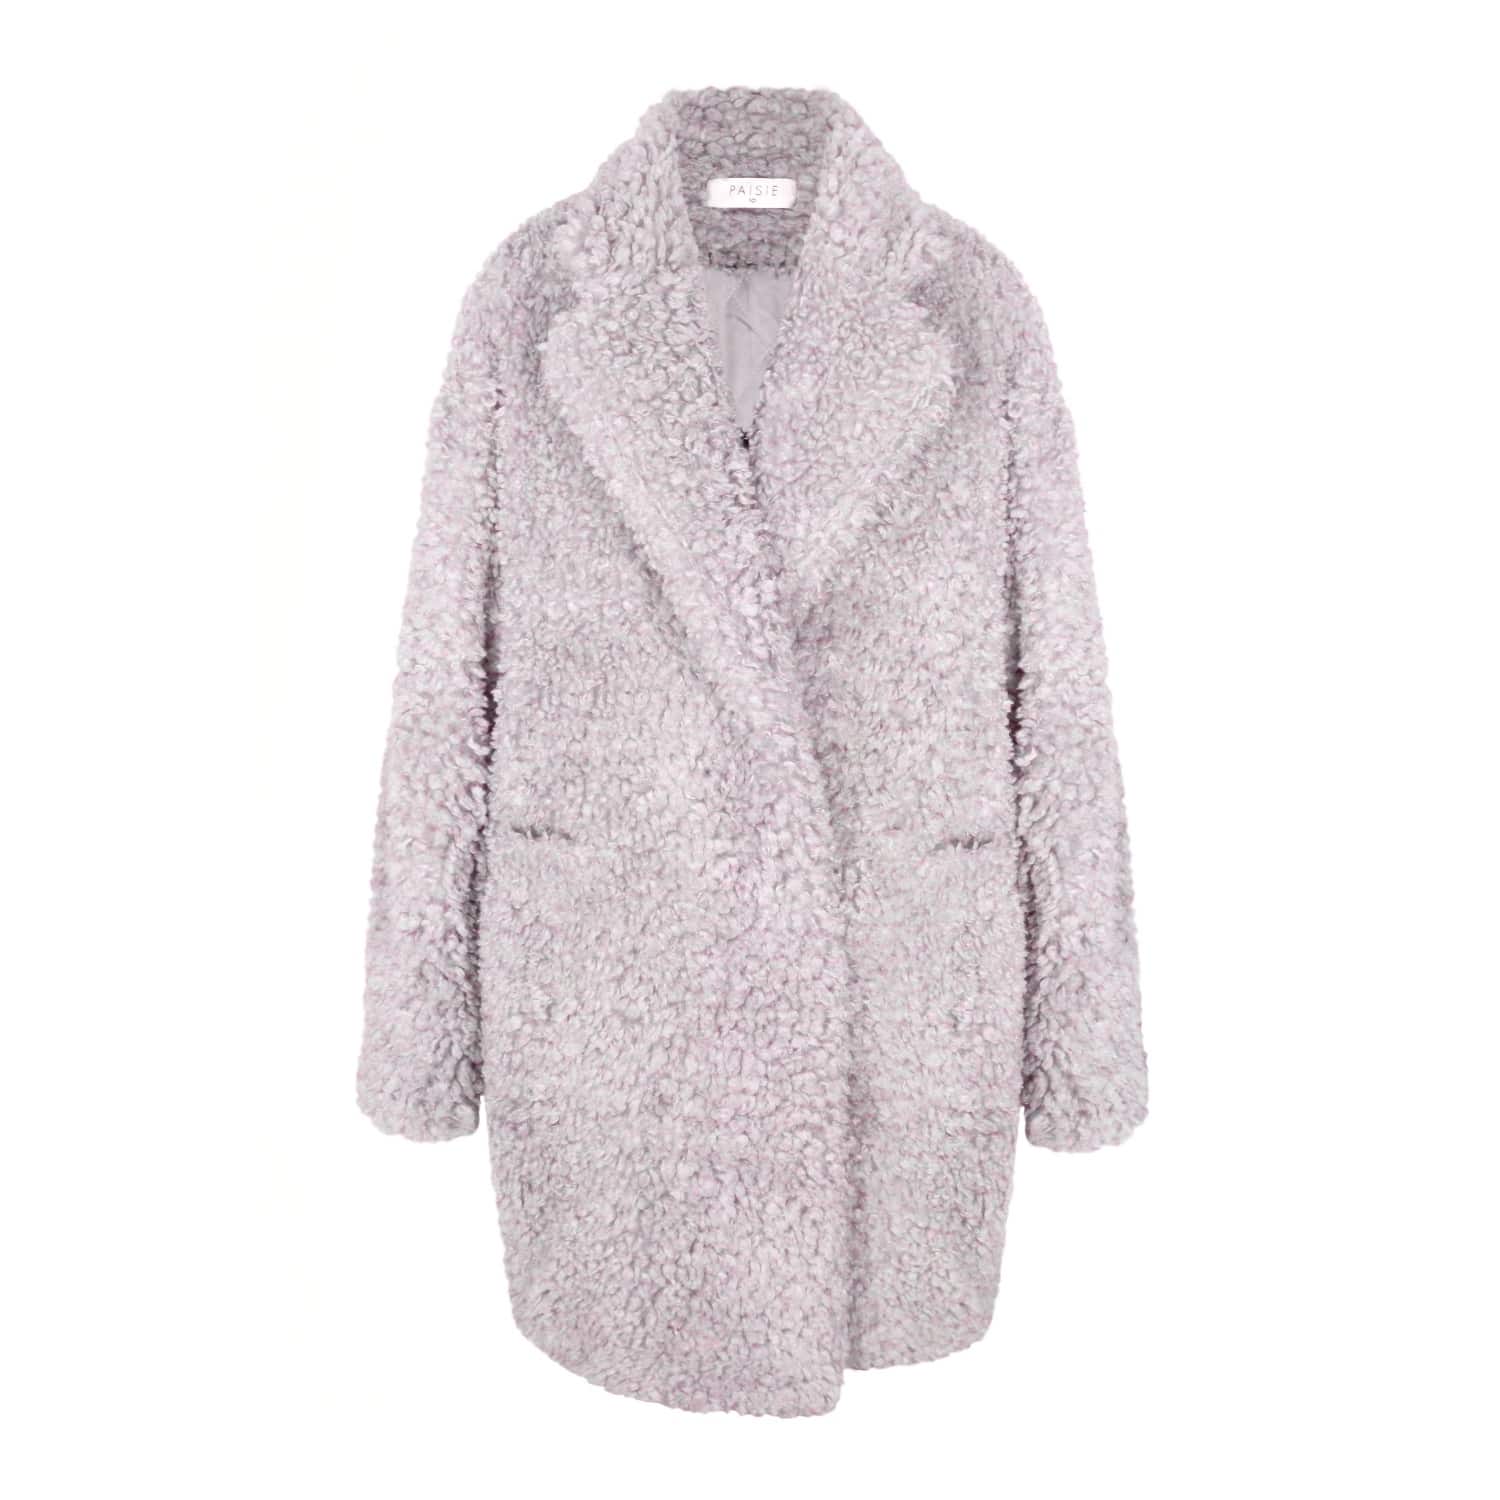 What I Screenshot This Week: The Stunning Teddy Coat That Stopped Me In My Tracks